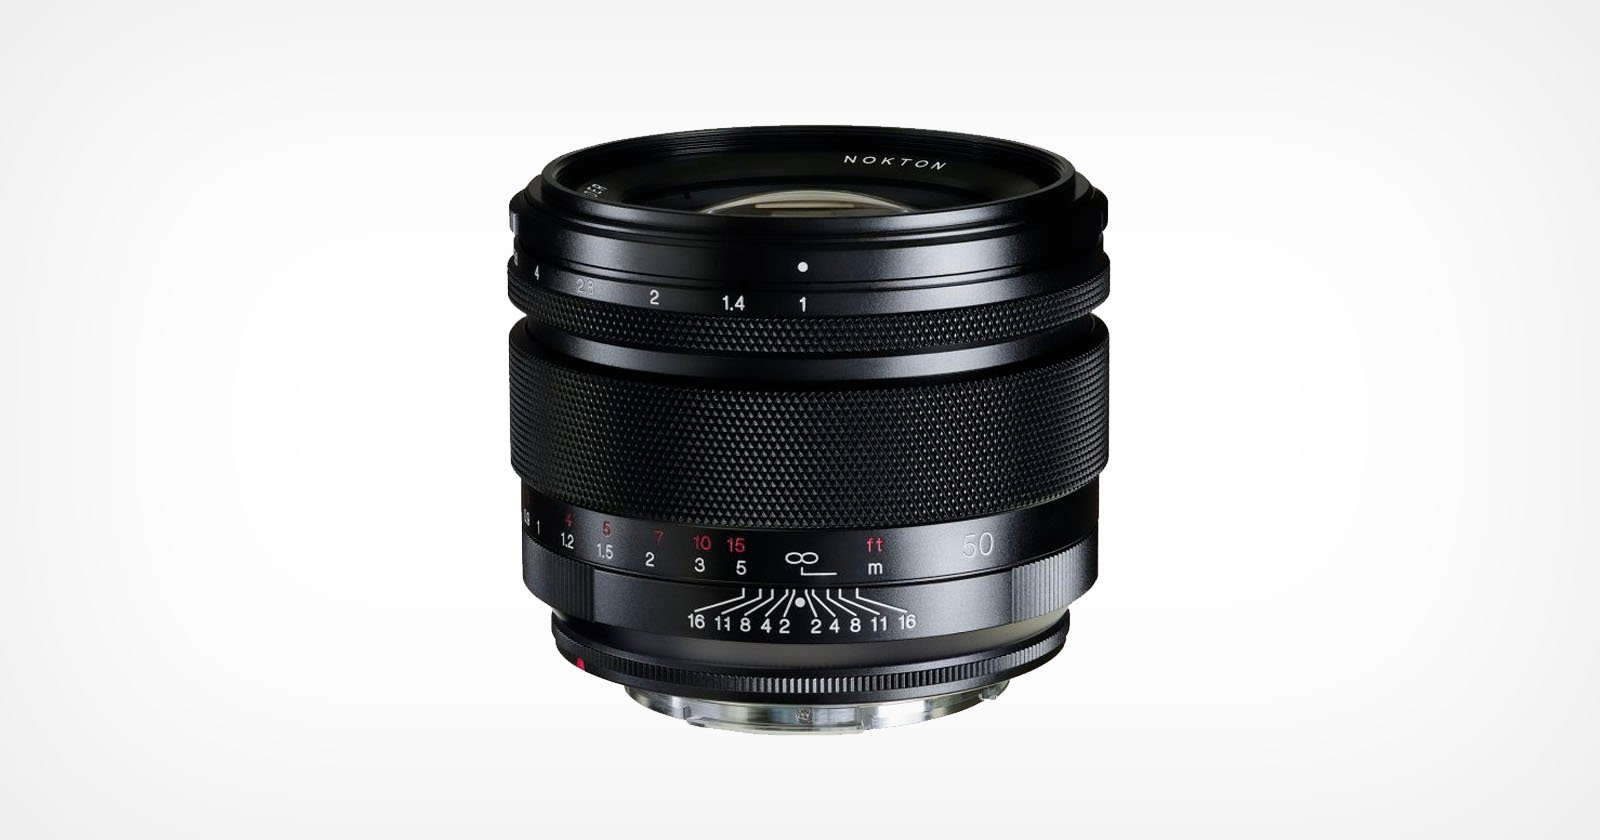 Cosina is Making its First a Canon RF-Mount Lens: The Nokton 50mm f/1